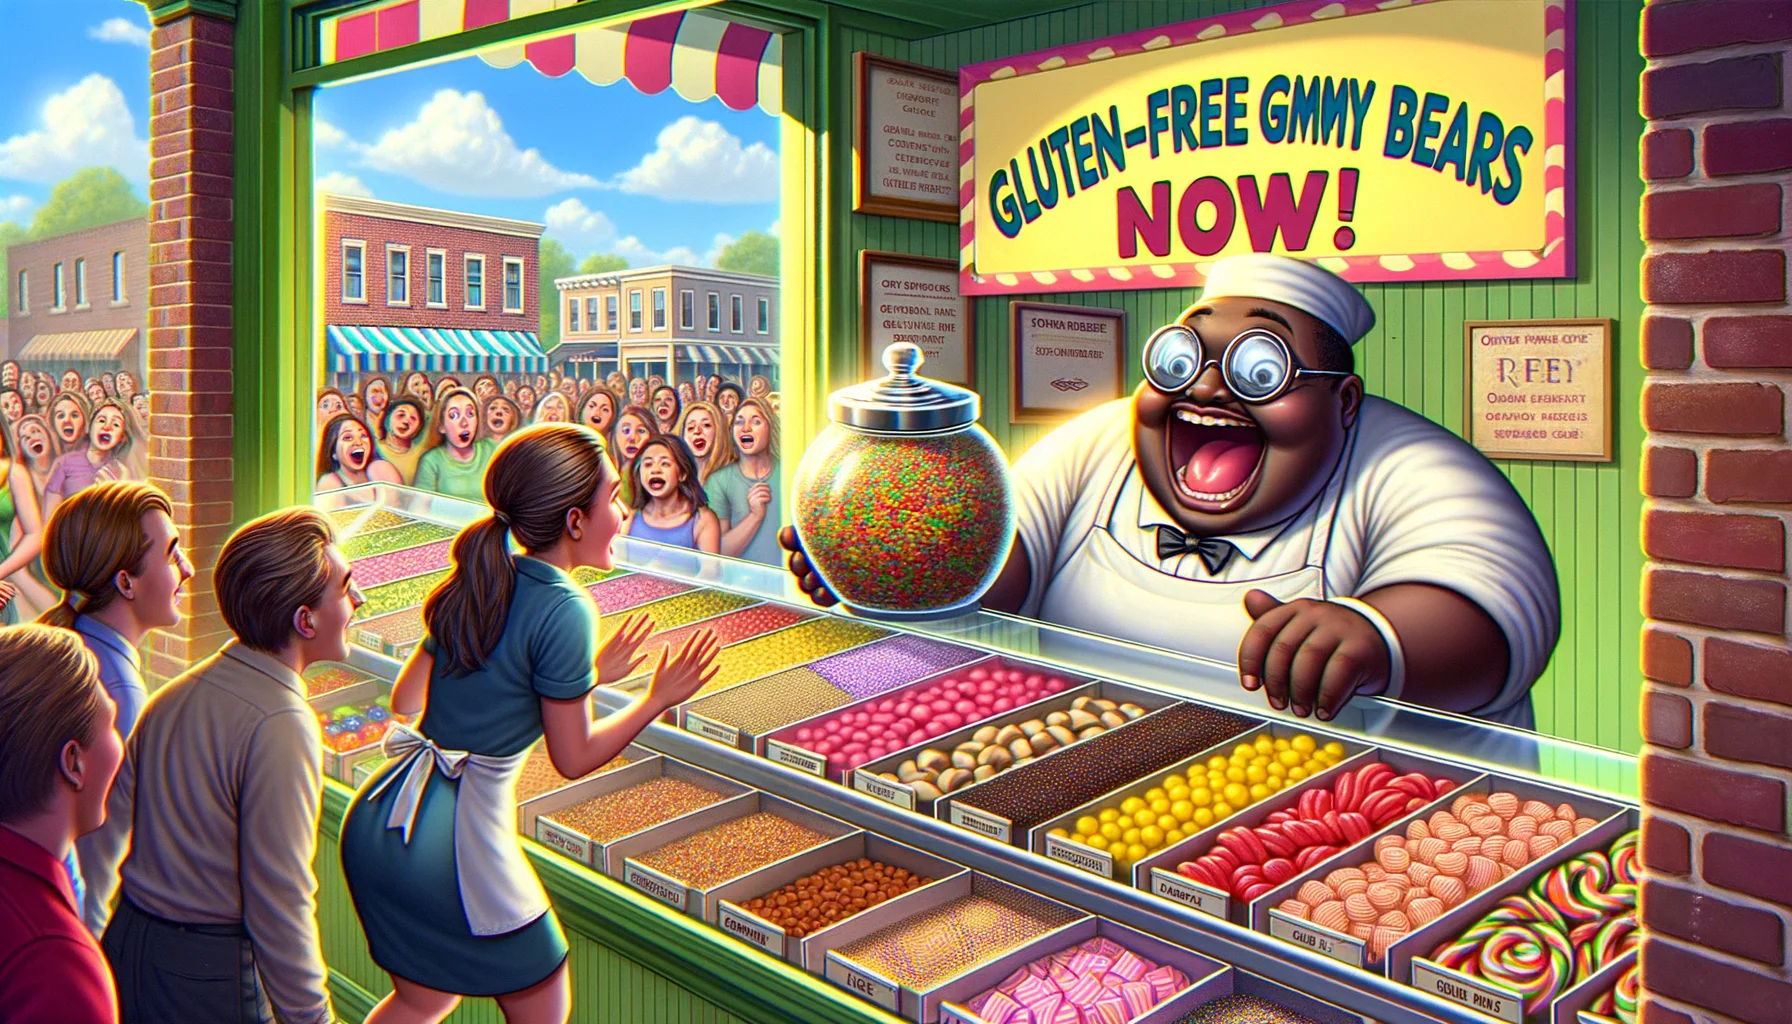 Imagine a bustling candy shop on a bright sunny day. A long glass counter is filled with all sorts of delightful candies and sweets. Behind it, a cheerful black female shop assistant is wearing a white apron, her smile as bright as the array of candies. Directly across from her, a humorous scene is taking place. A man, sporting a Caucasian descent with a funny expression of bewilderment on his face, is scrutinizing a big jar labeled 'Gluten-Free Gummy Bears' with a pair of large magnifying glasses. A sign hangs above the counter emphasizing 'Order Gluten-Free Gummy Bears Now!' with colorful, bold typography. The scene is filled with pity and laughter, causing an uproarious amount of cheer.